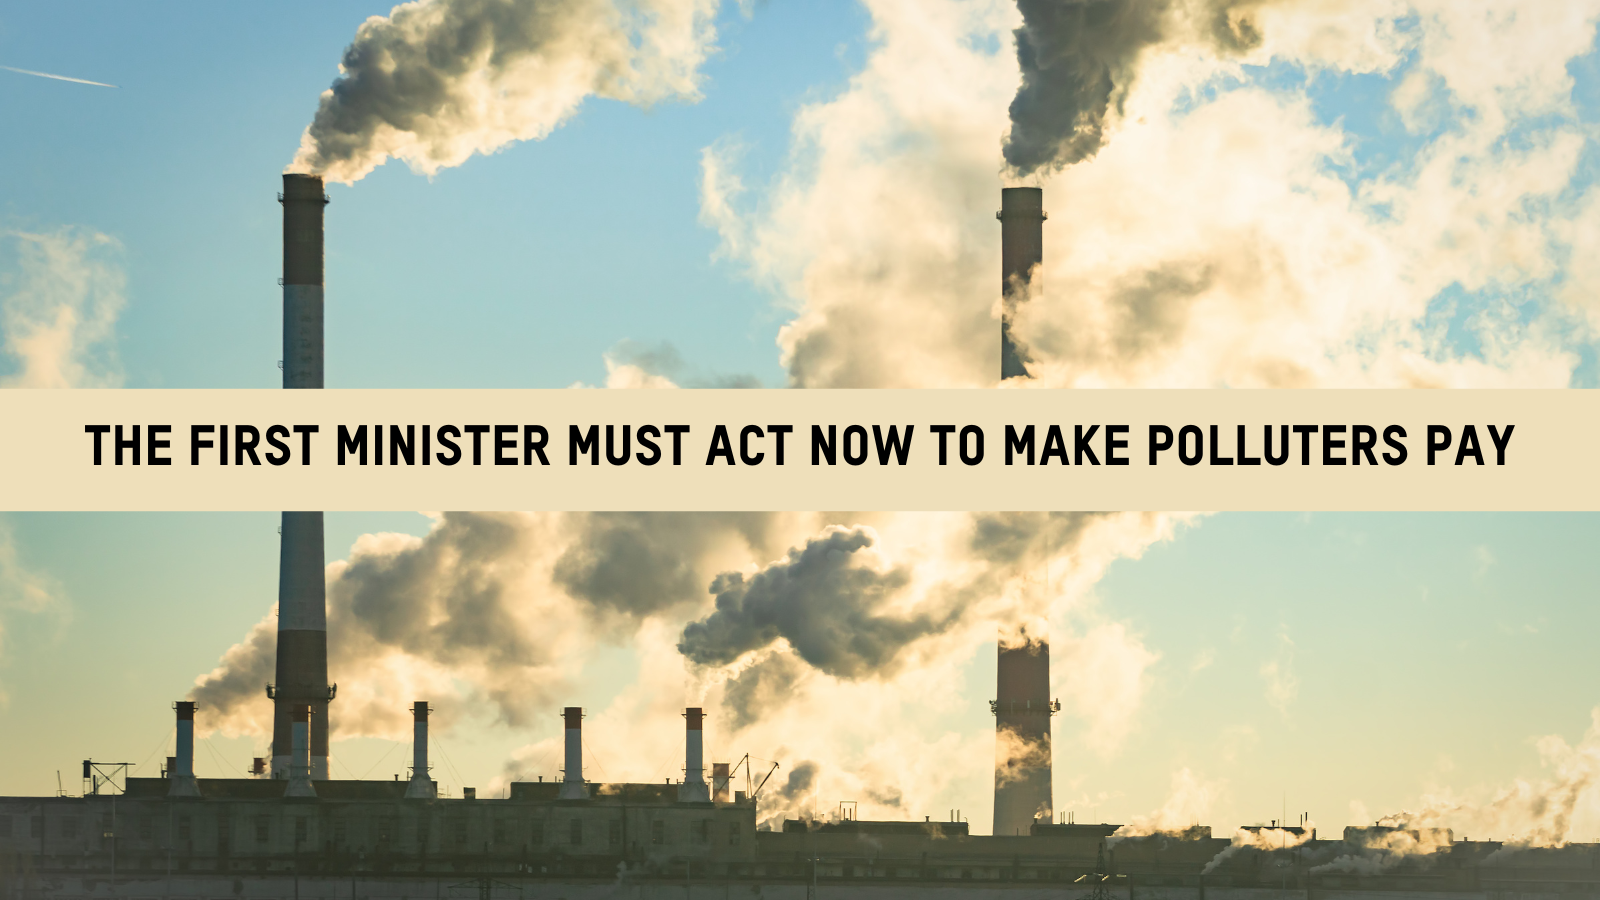 First Minister’s climate credibility is on a knife edge: he must act to make polluters pay